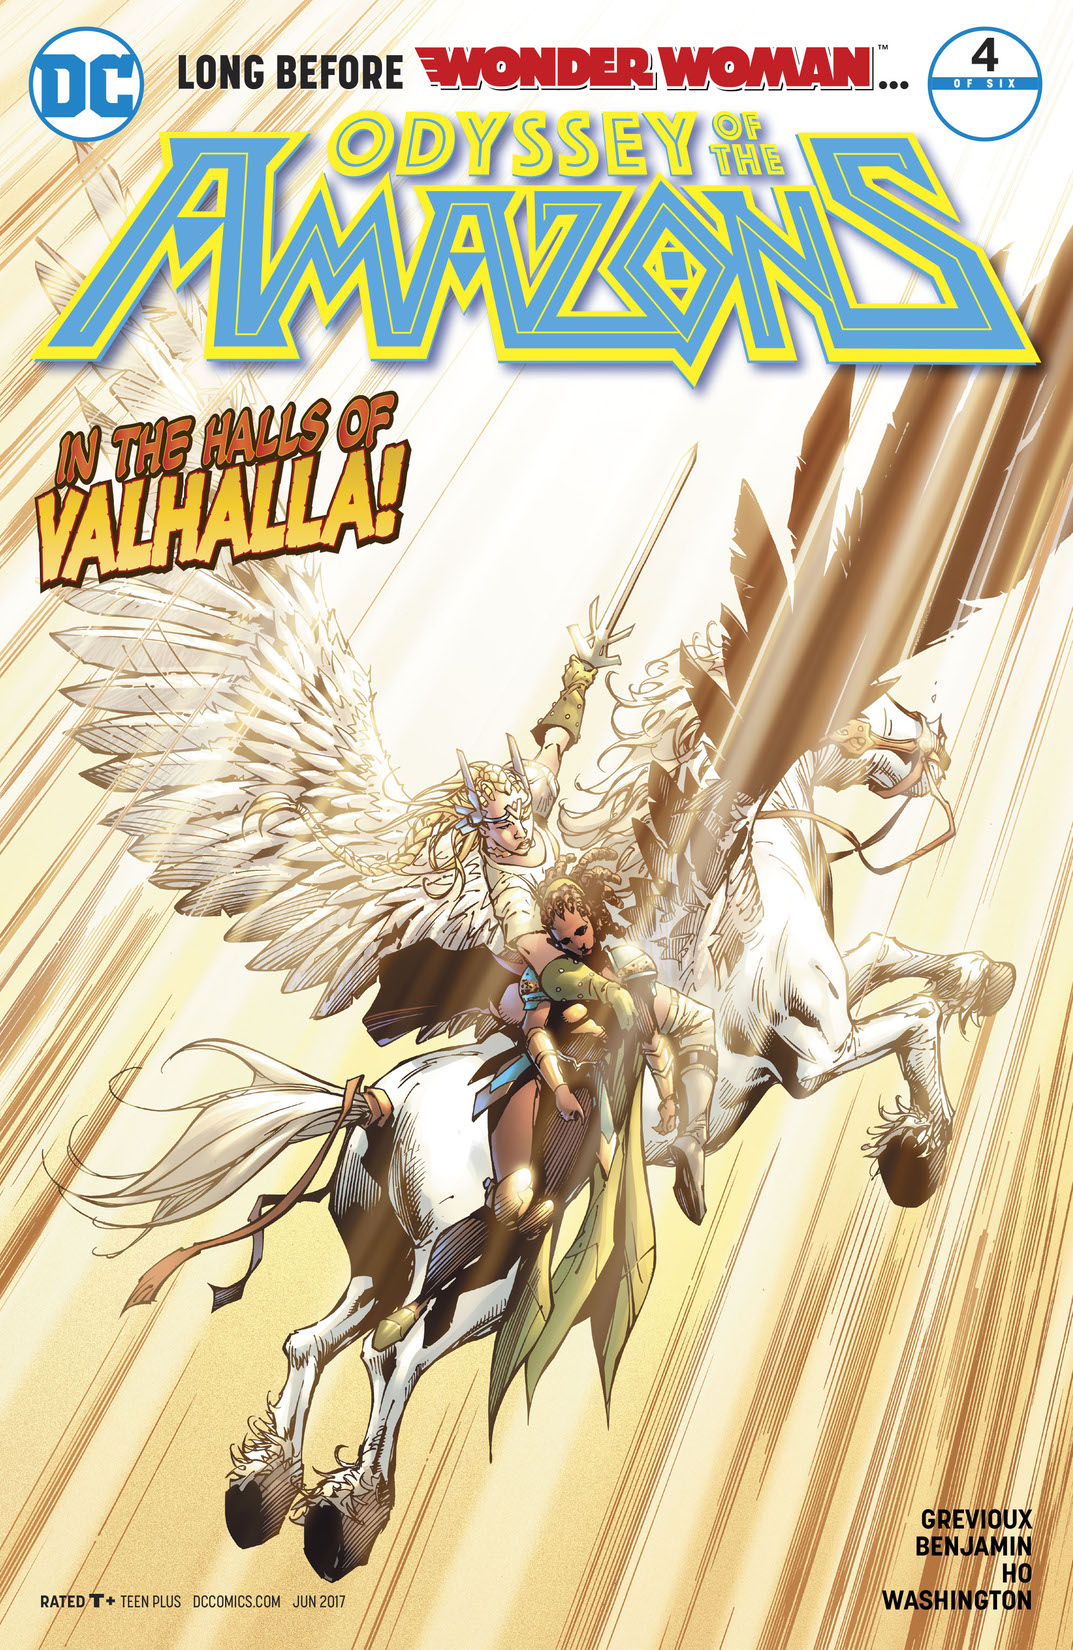 The Odyssey of the Amazons #4 preview images